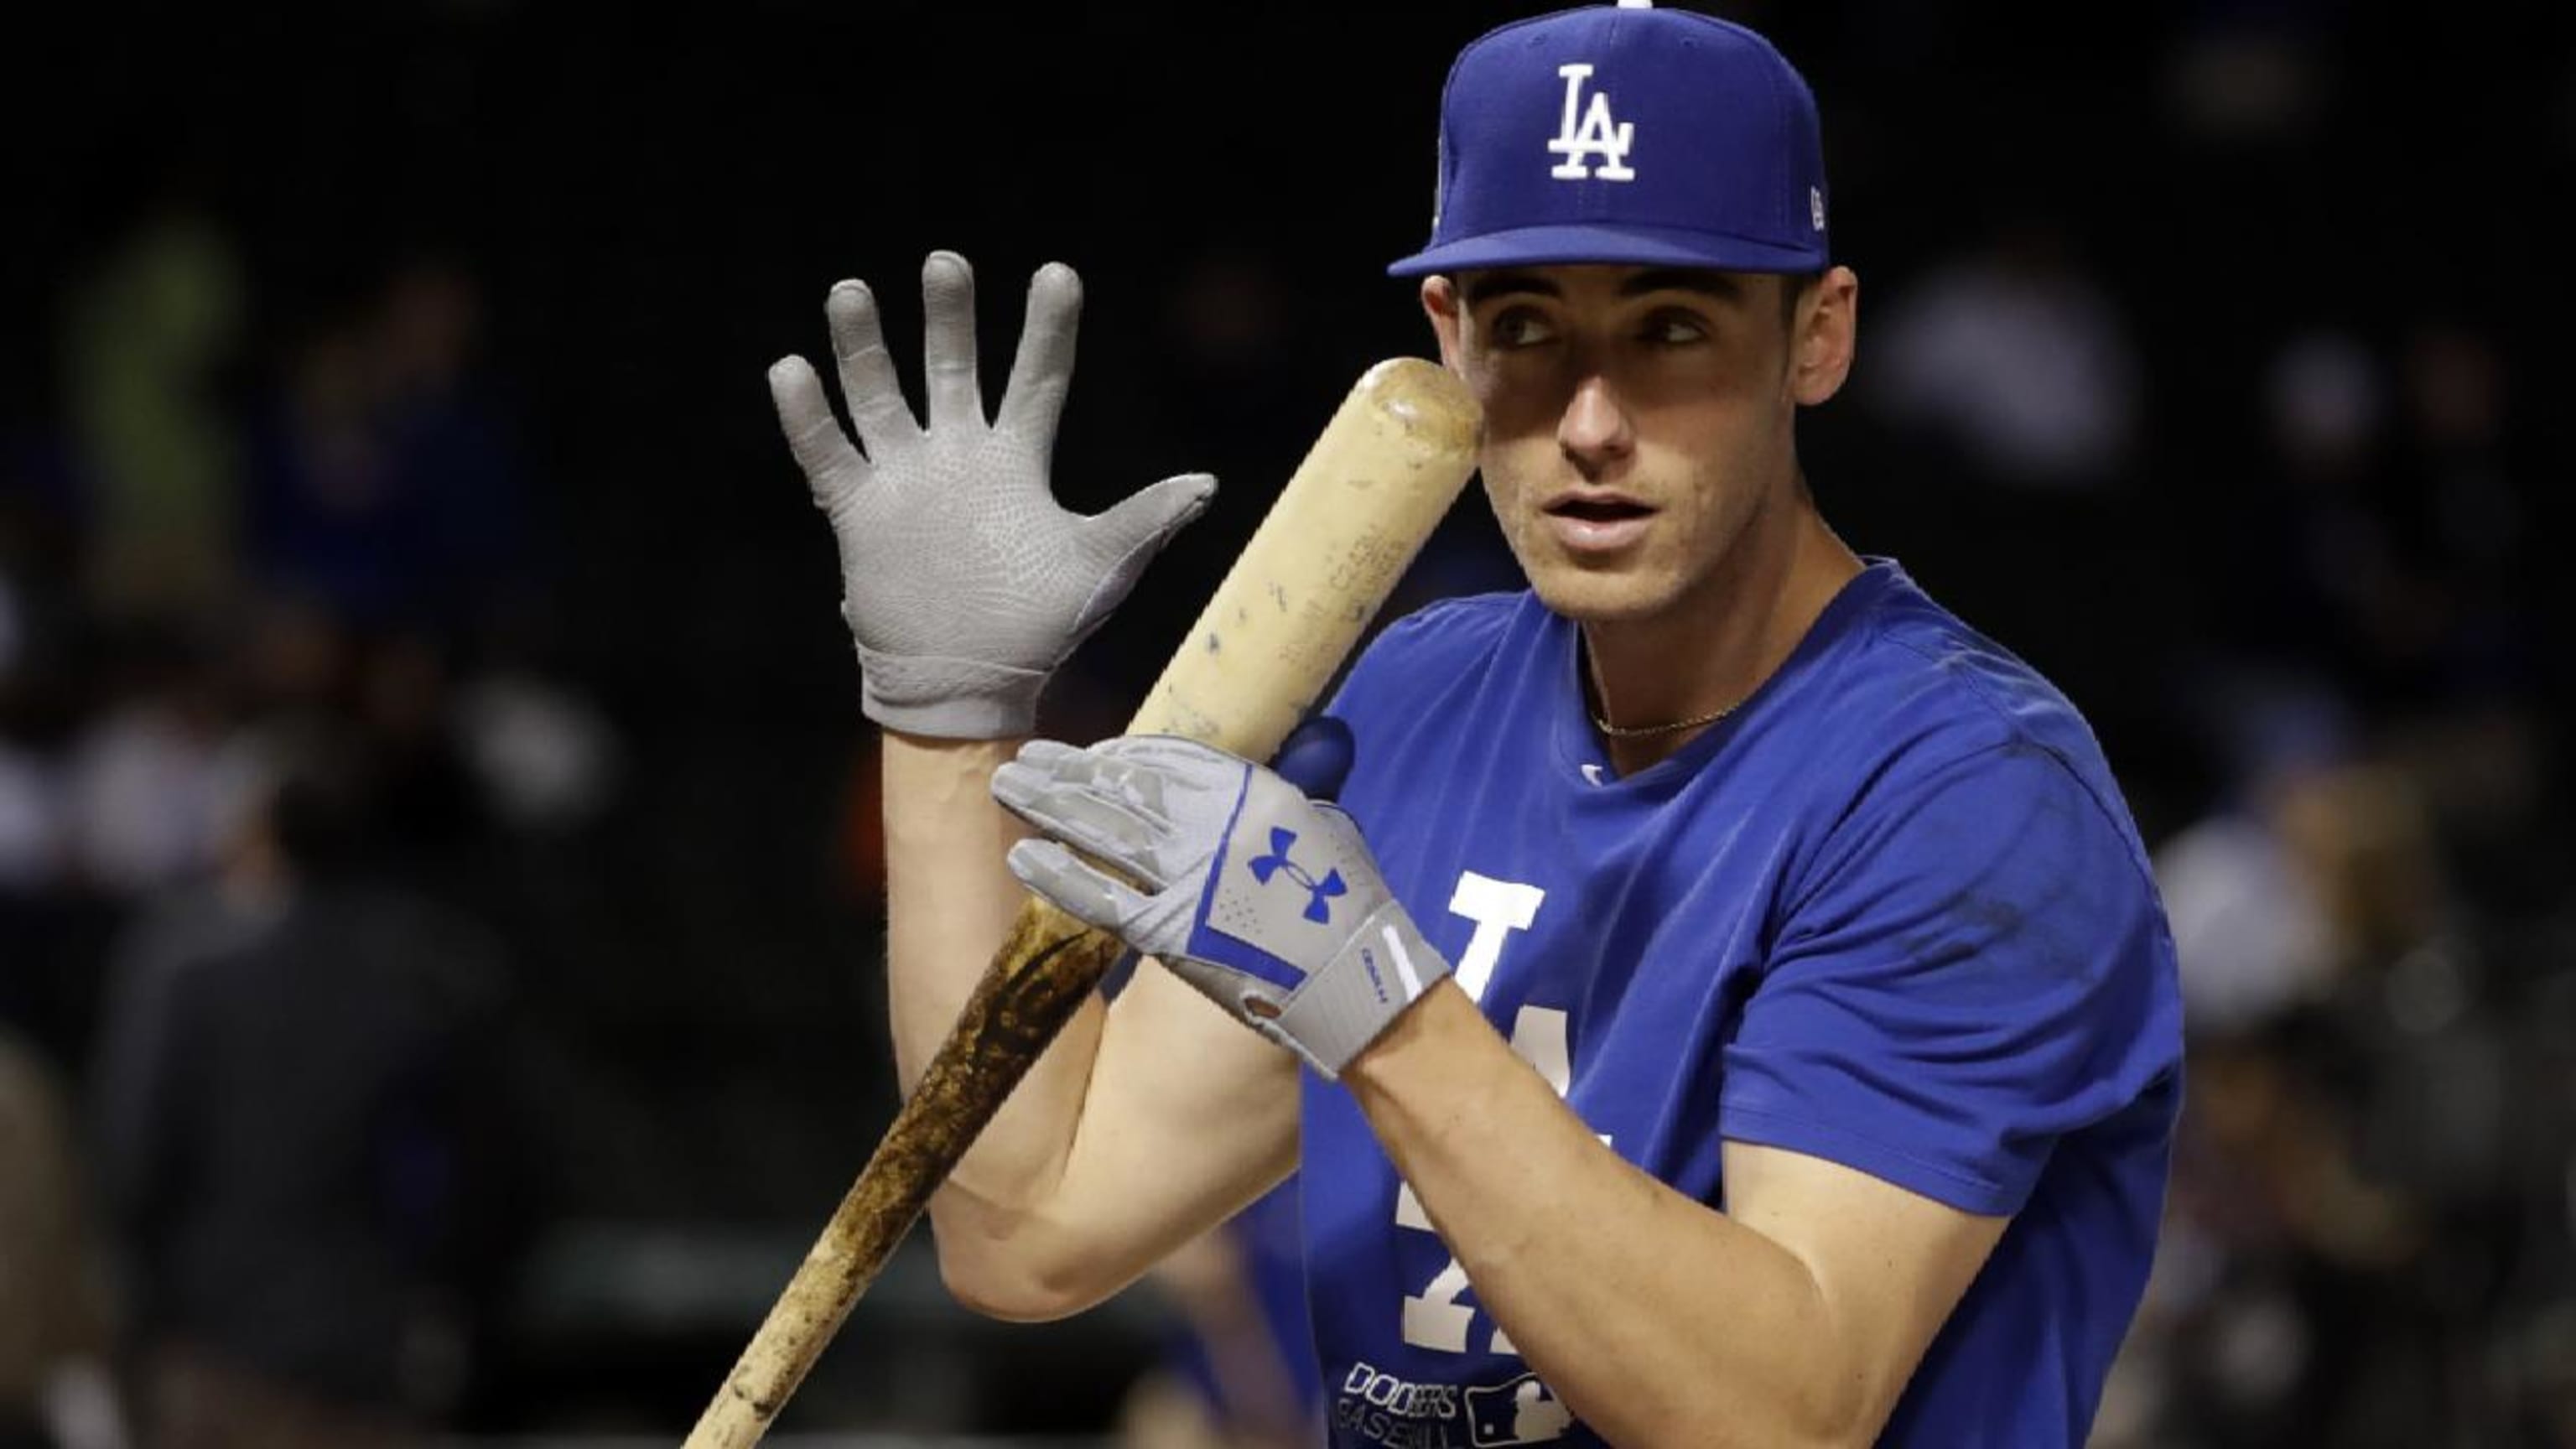 Cody Bellinger, the likely NL MVP, has been handcuffed by Nats in